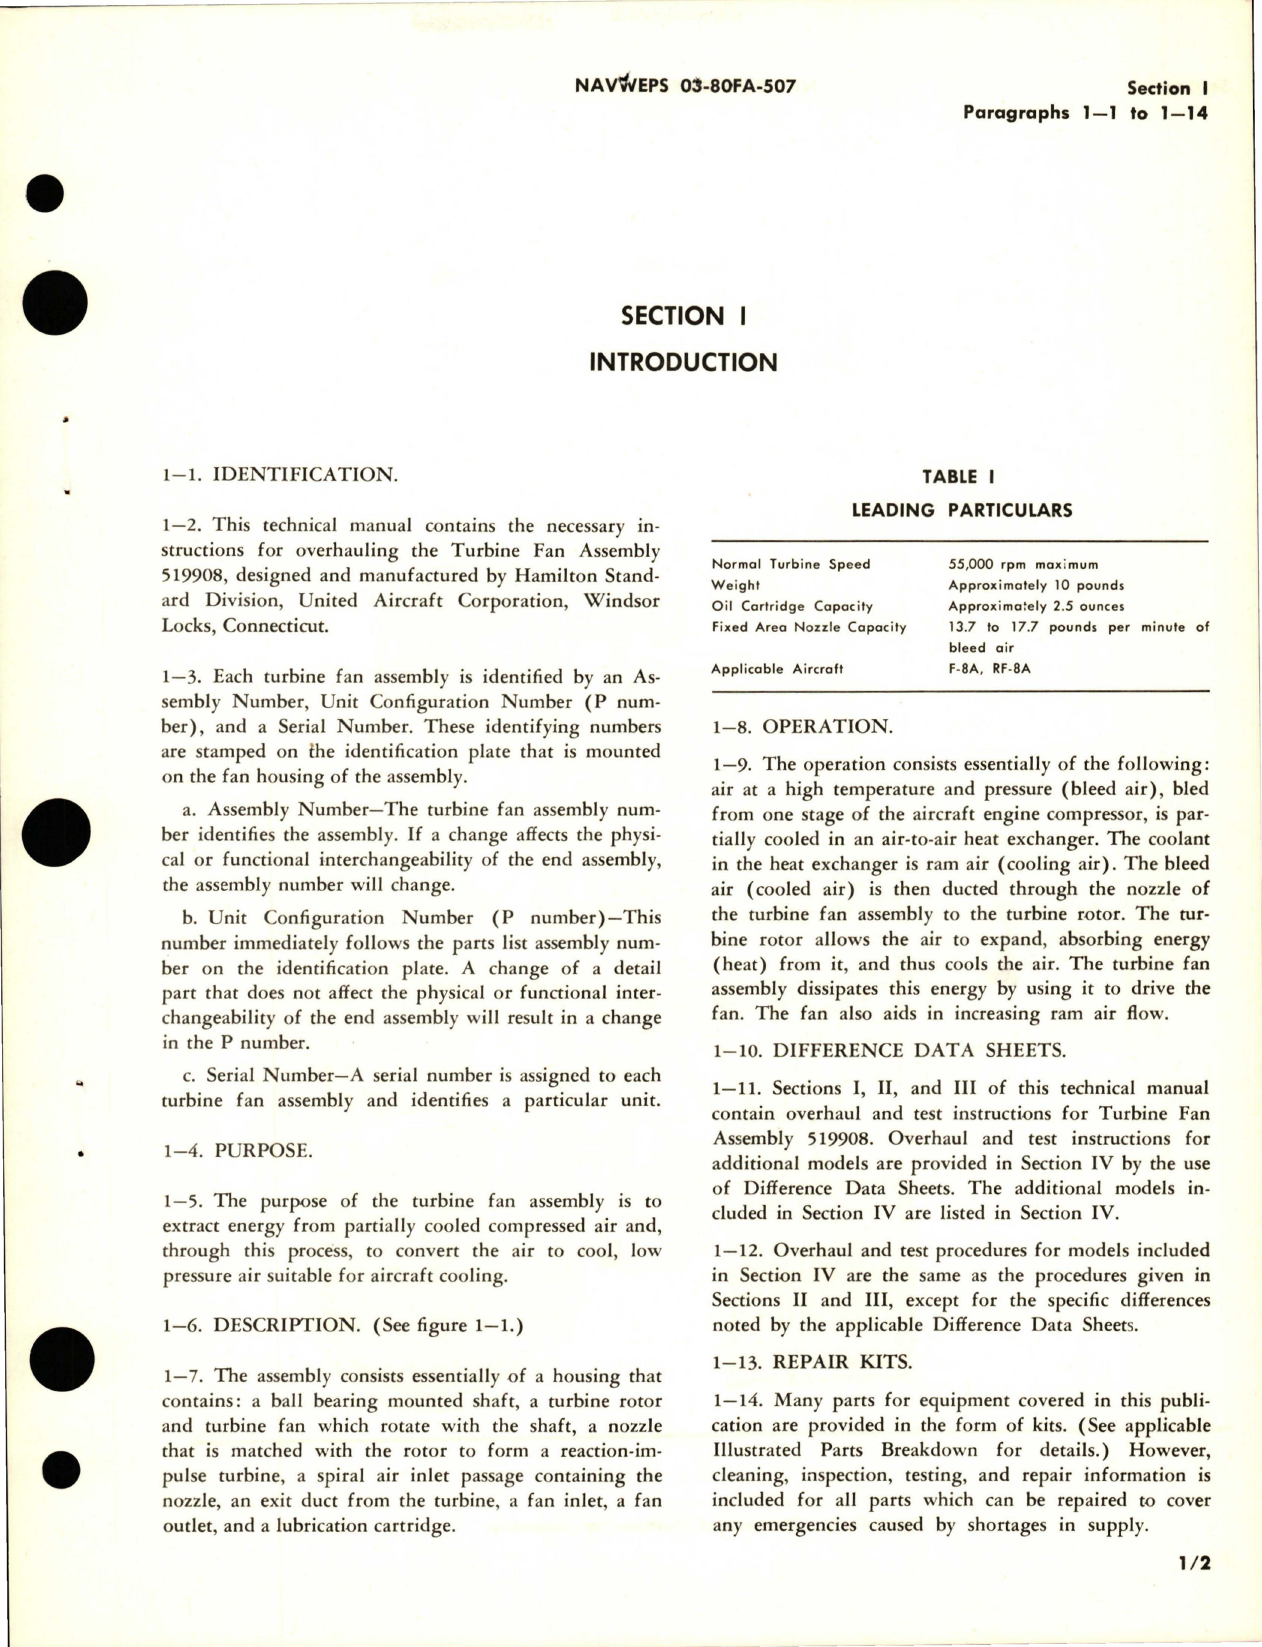 Sample page 5 from AirCorps Library document: Overhaul Instructions for Turbine Fan - Assemblies 519908, 519909, and 536928